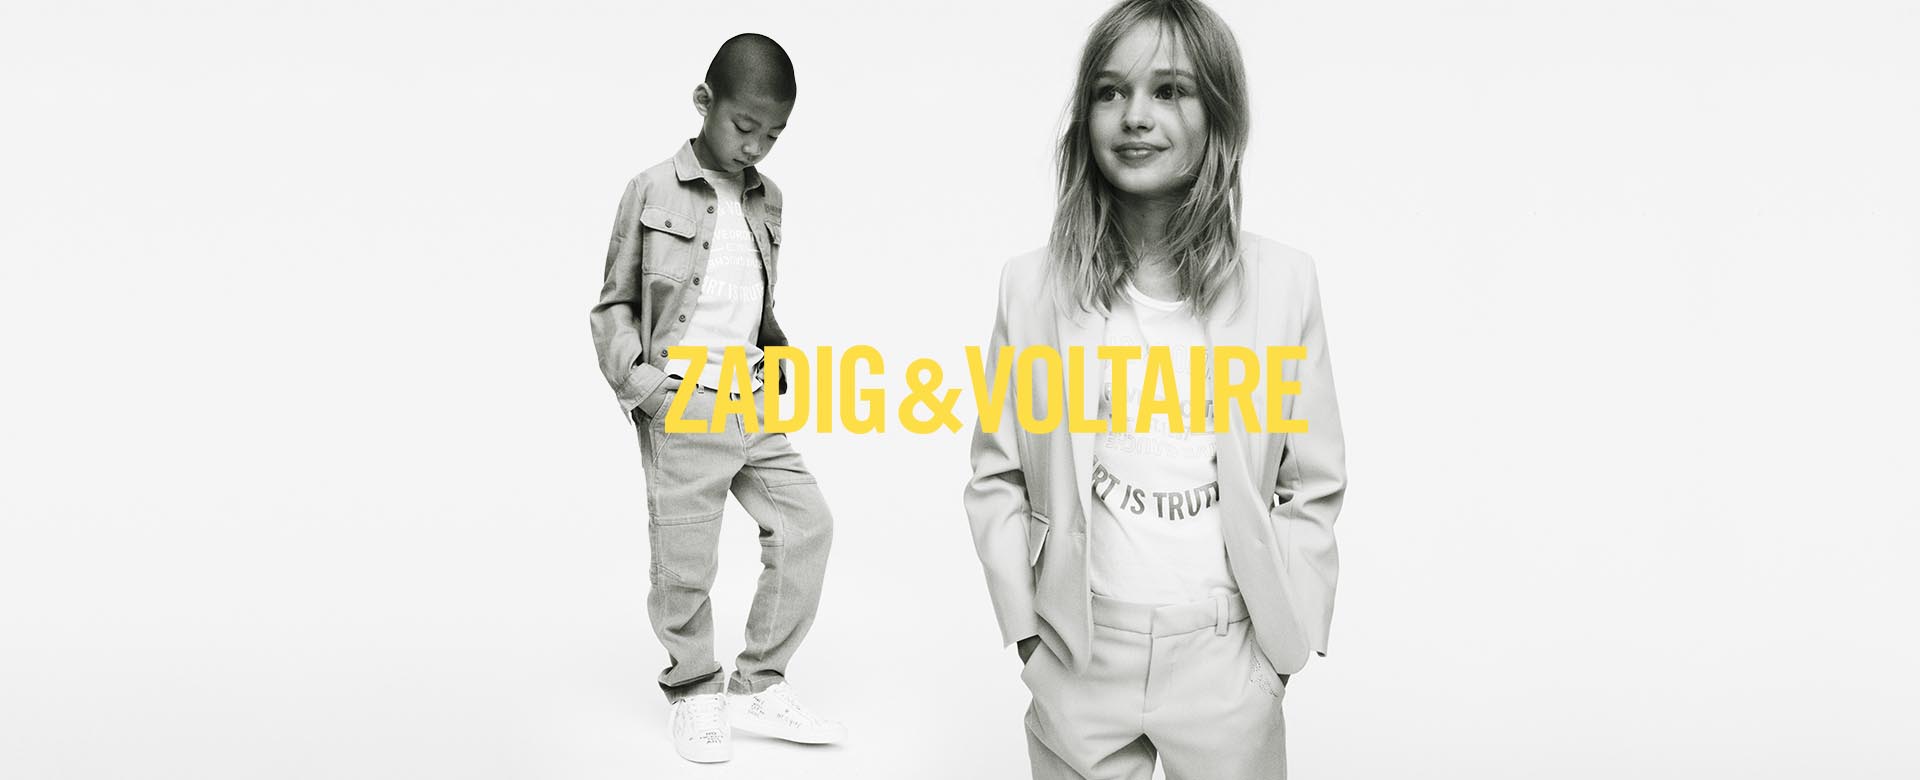 children's clothing for girls and boys from Zadig & Voltaire